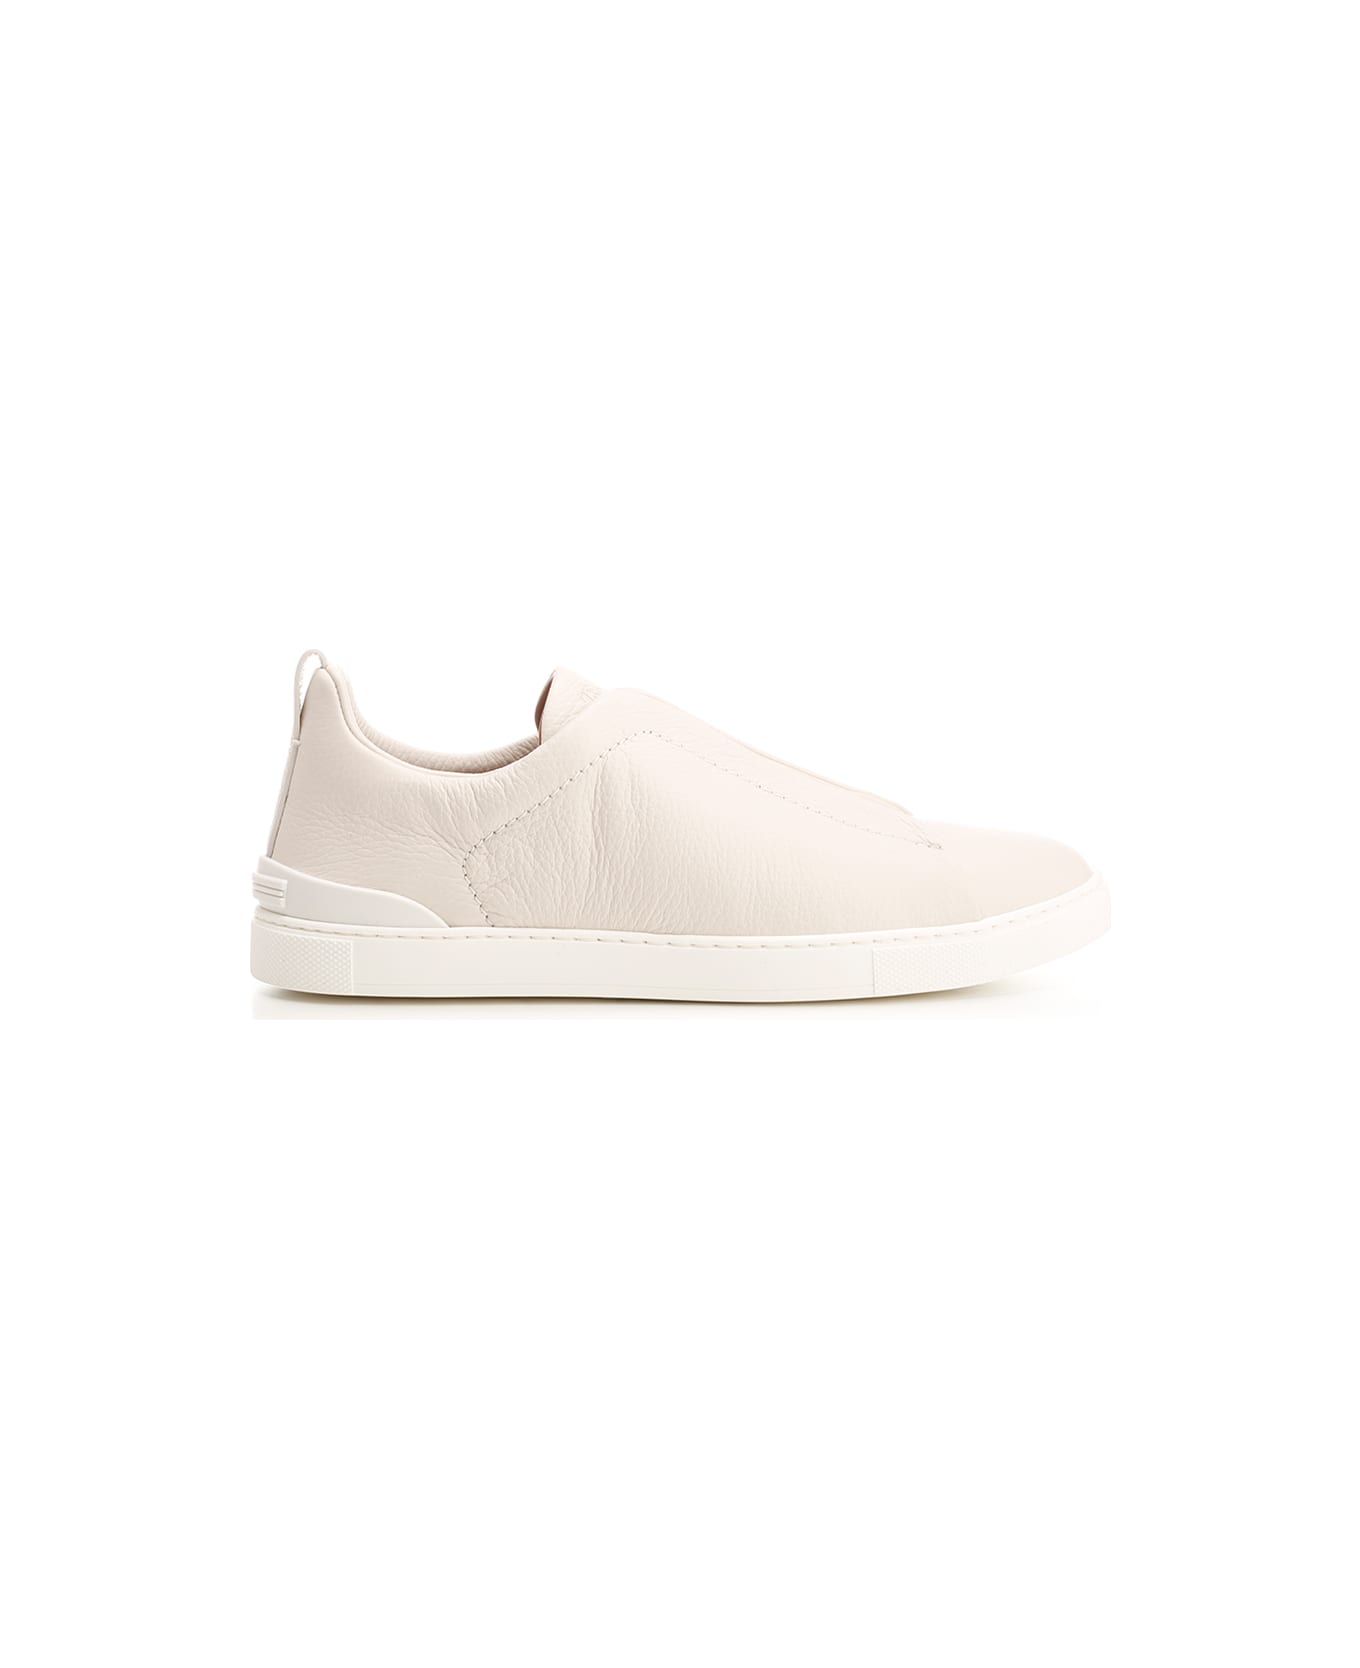 Zegna 'triple Stitch' Low Top Sneakers - White スニーカー